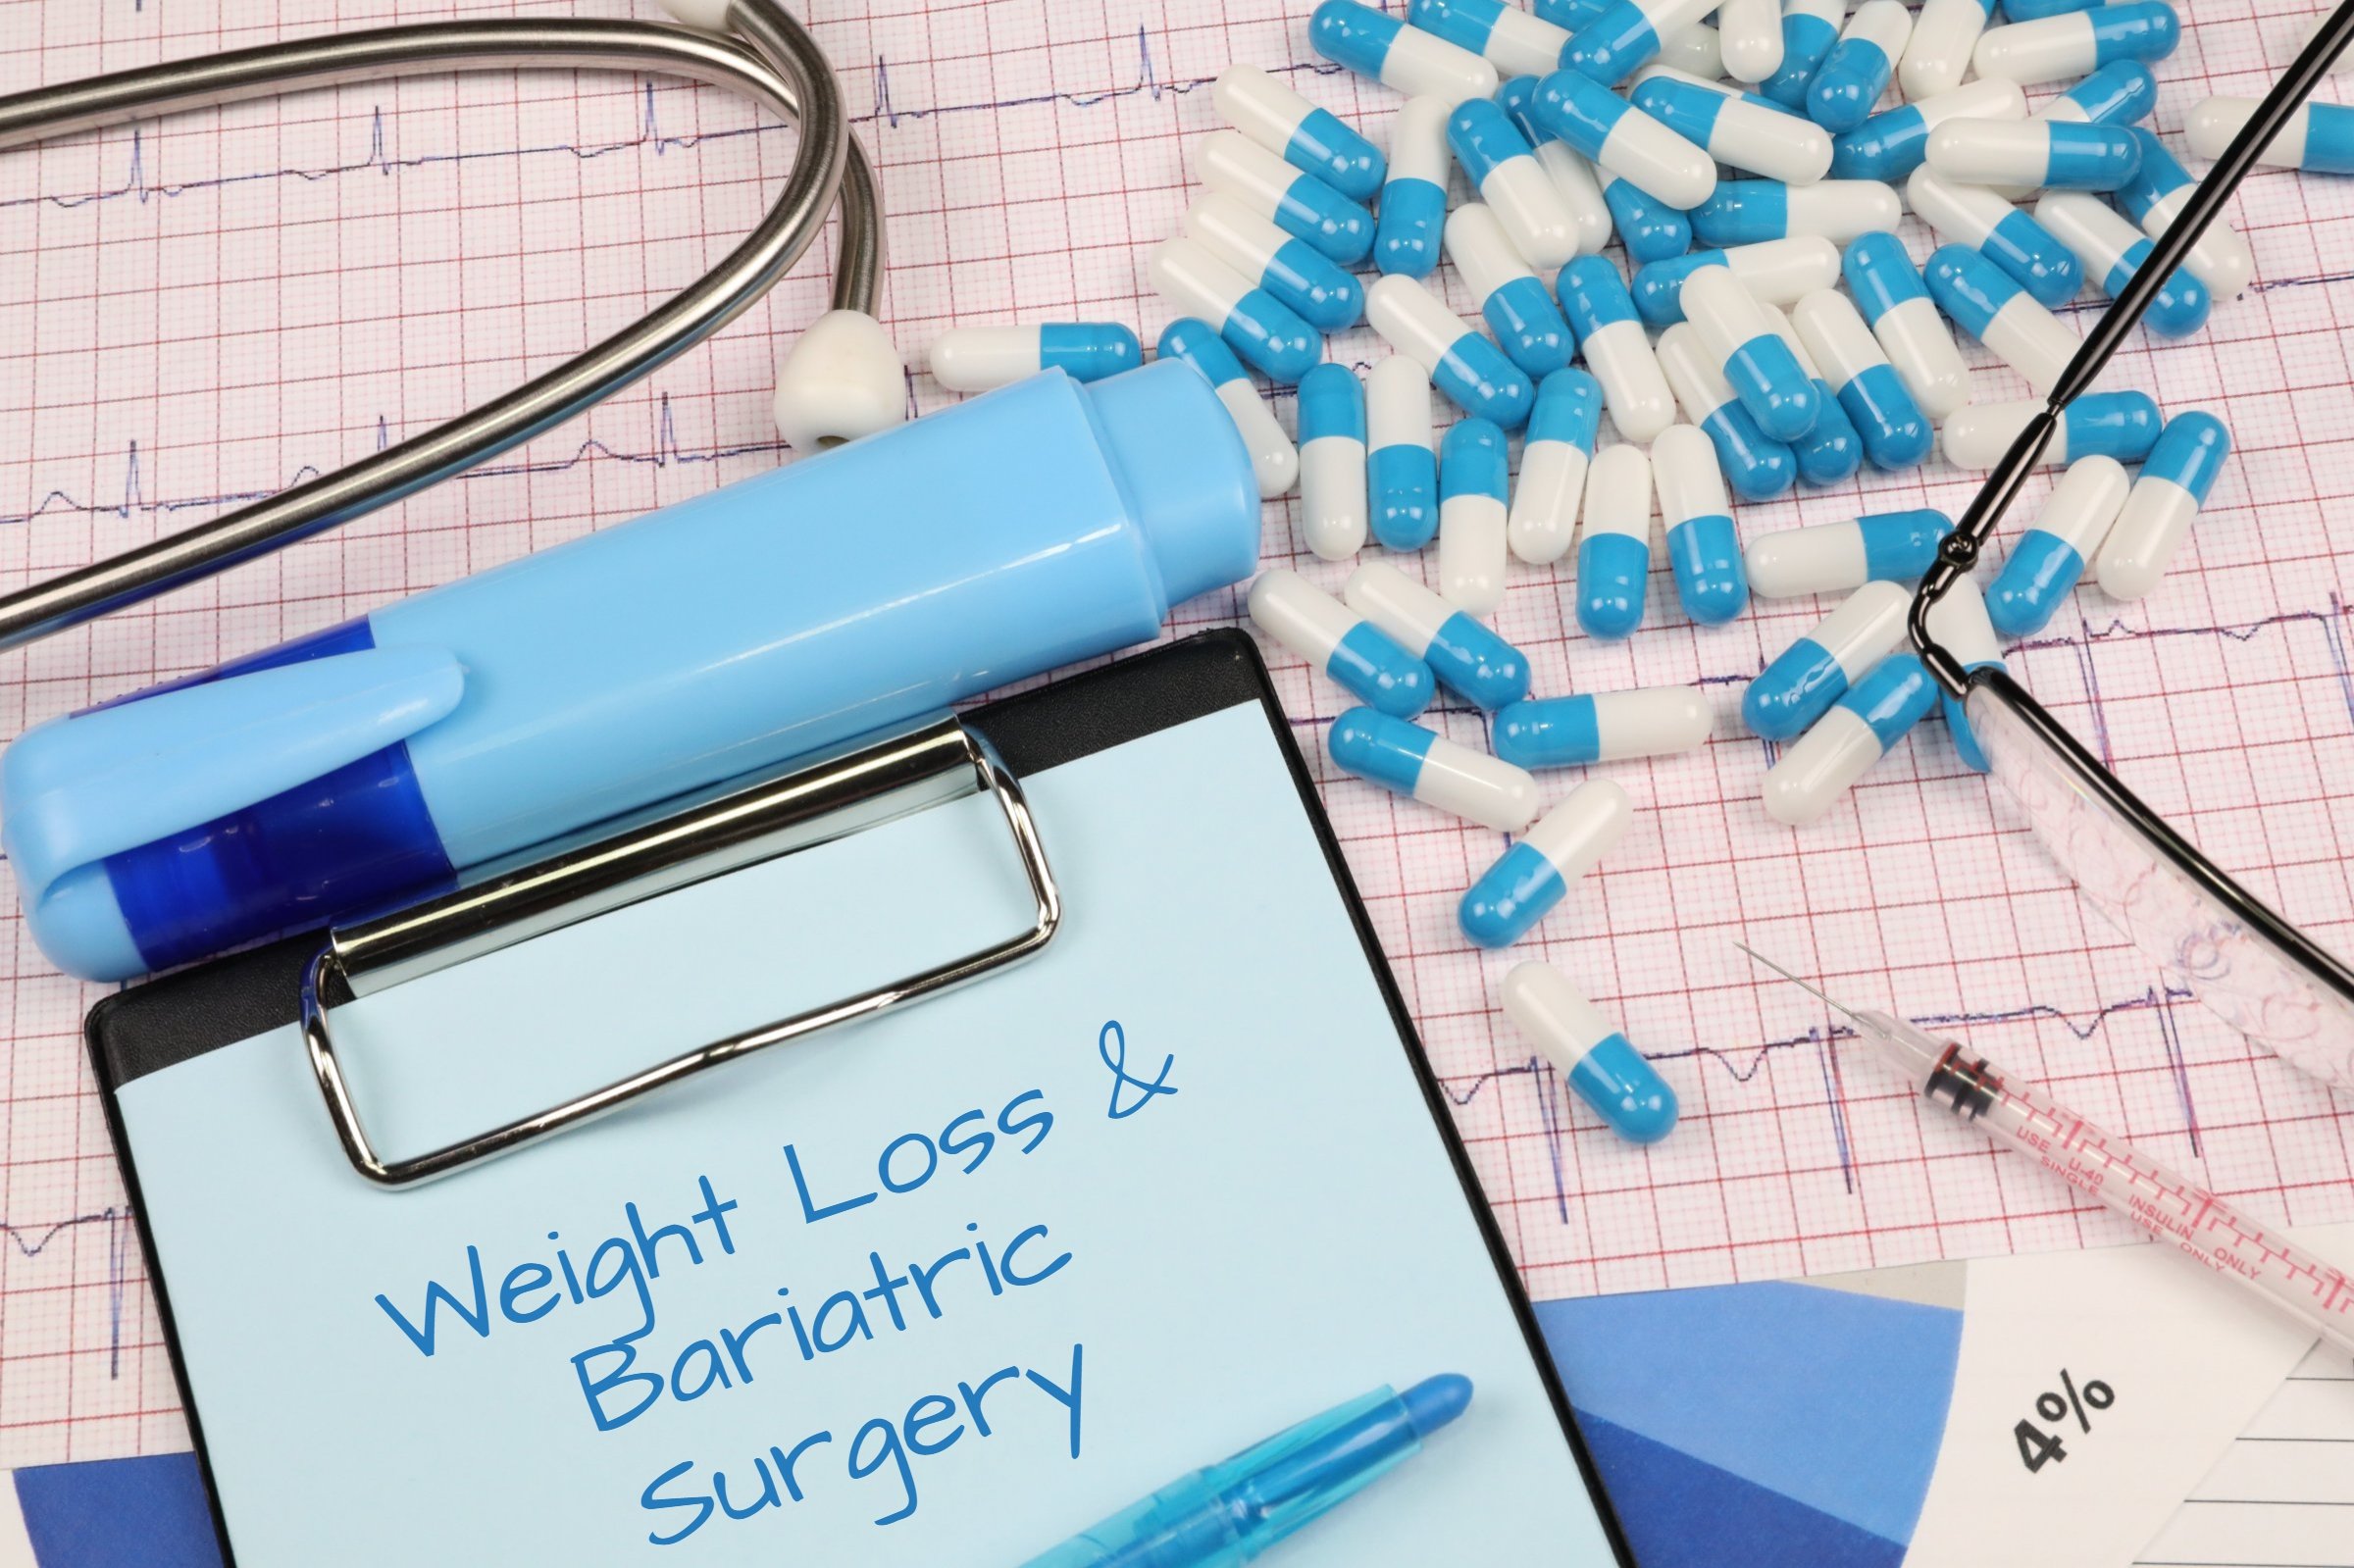 weight loss and bariatric surgery